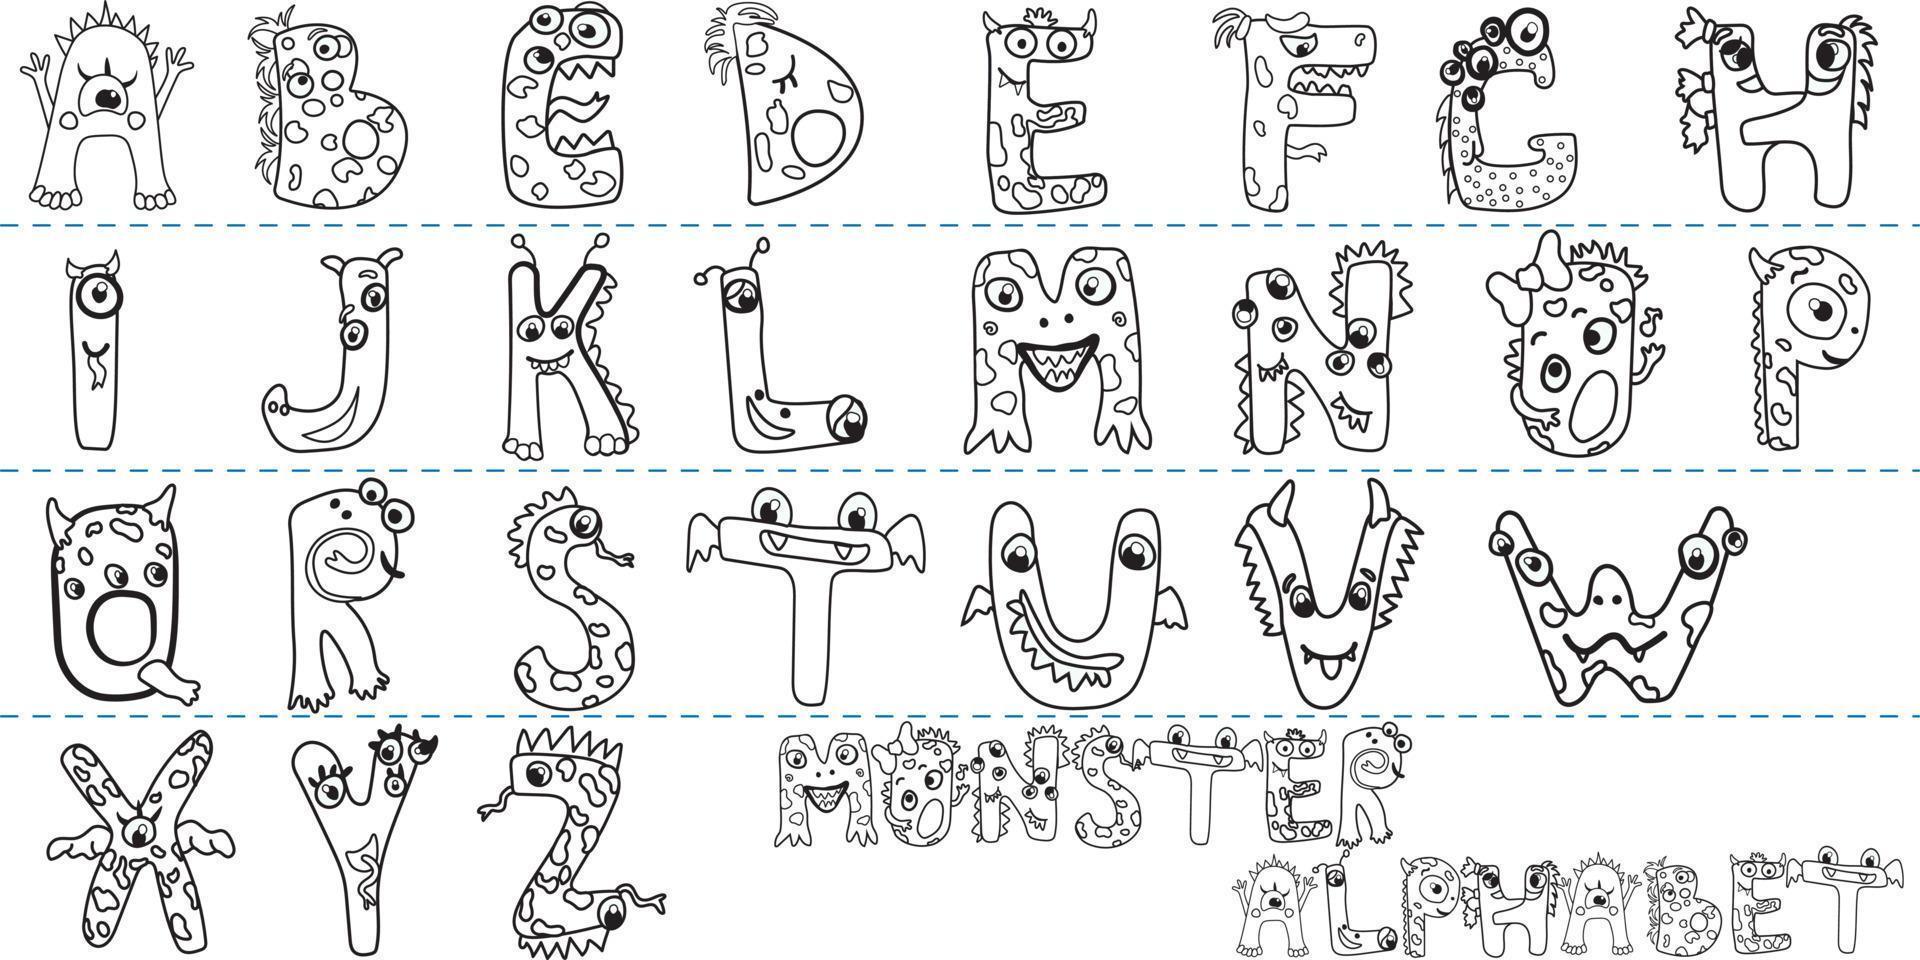 English alphabet coloring book with funny monsters. Alphabet font for children. Isolated elements for coloring.Children's education. The upbringing and development of the child. Fun with fonts vector